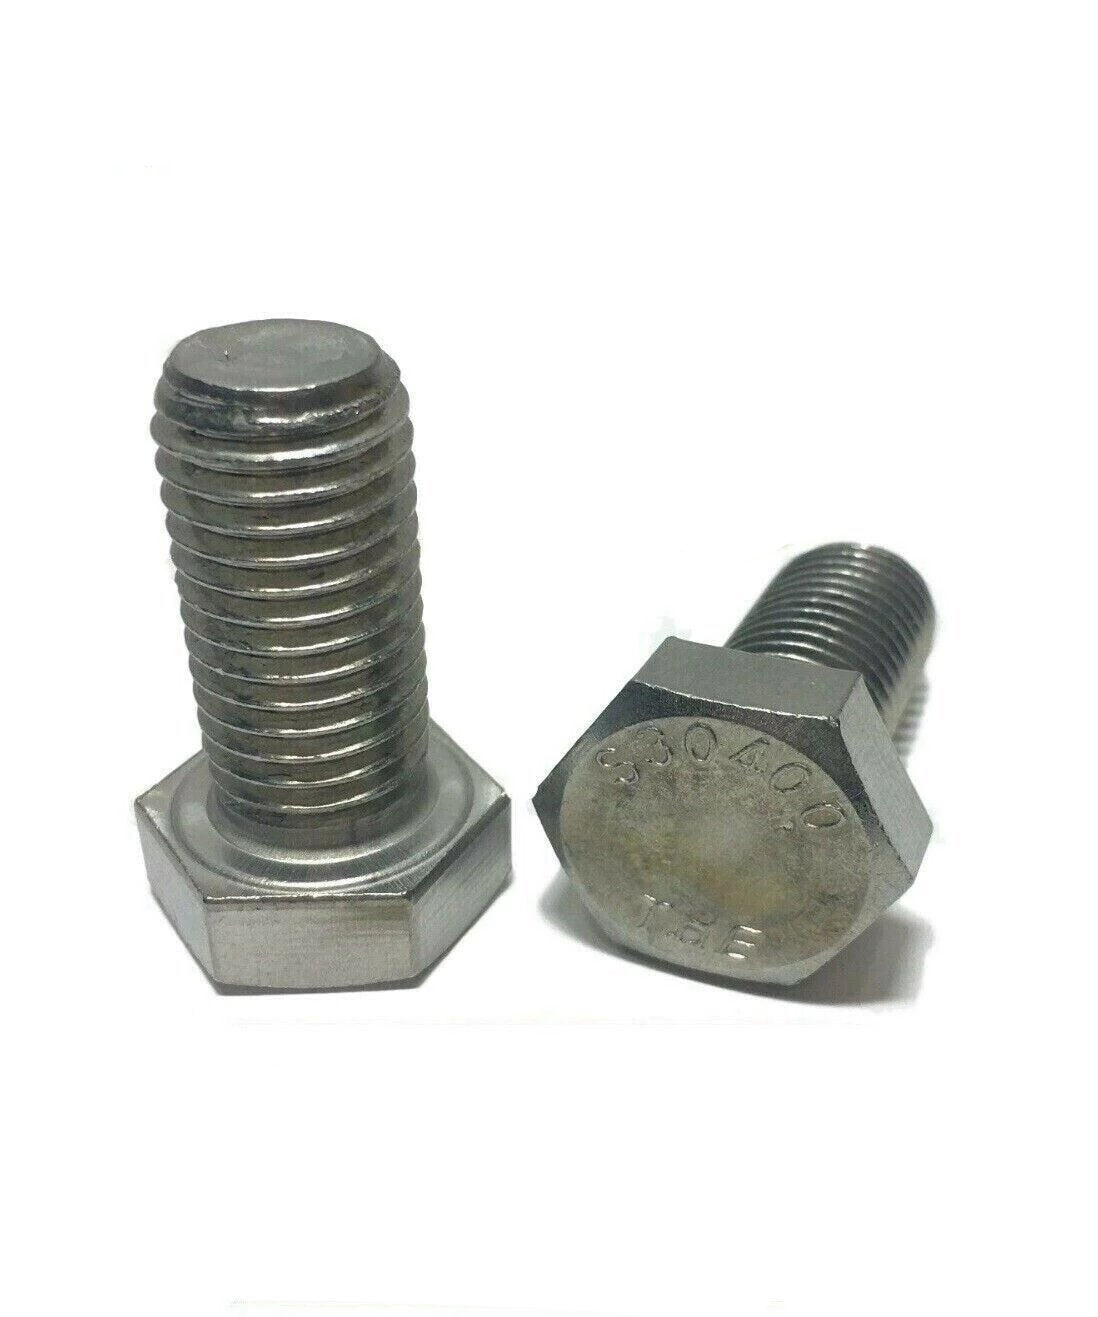 3/8"-16 x 3/4" StaInless Steel Hex Cap Screw / Tap Bolt 18-8 / 304